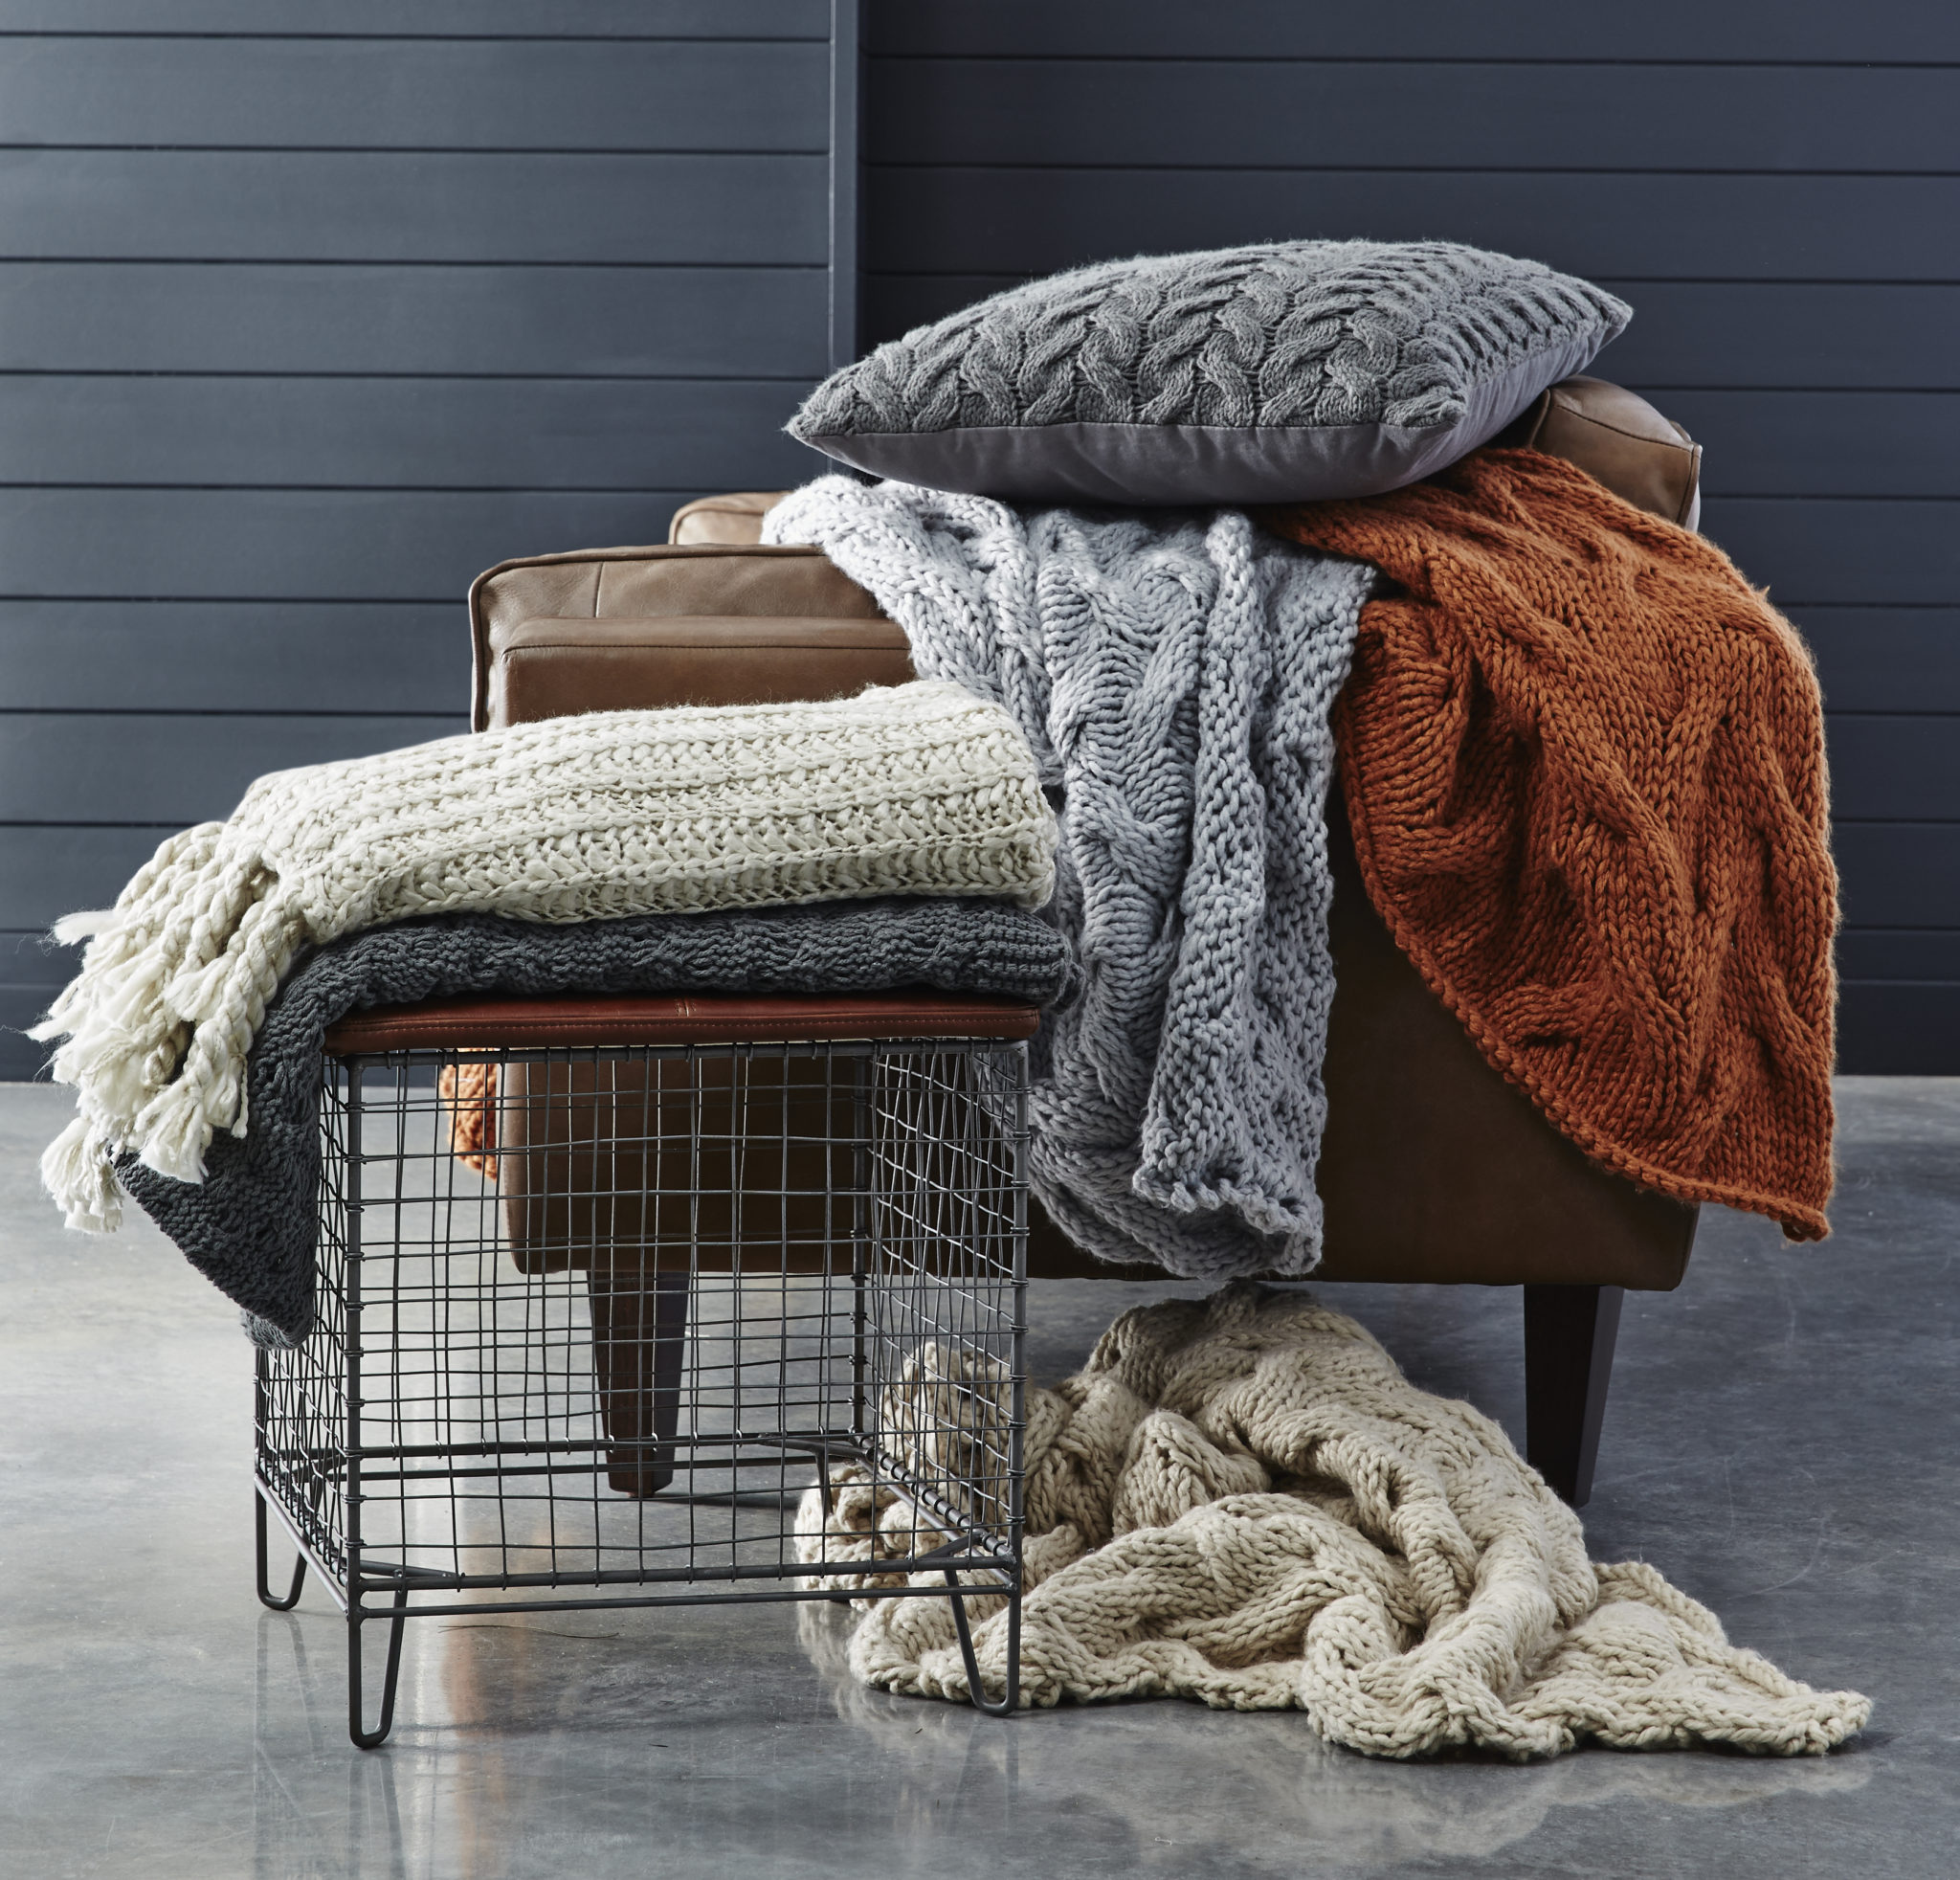 Cosy throws from Freedom's latest range